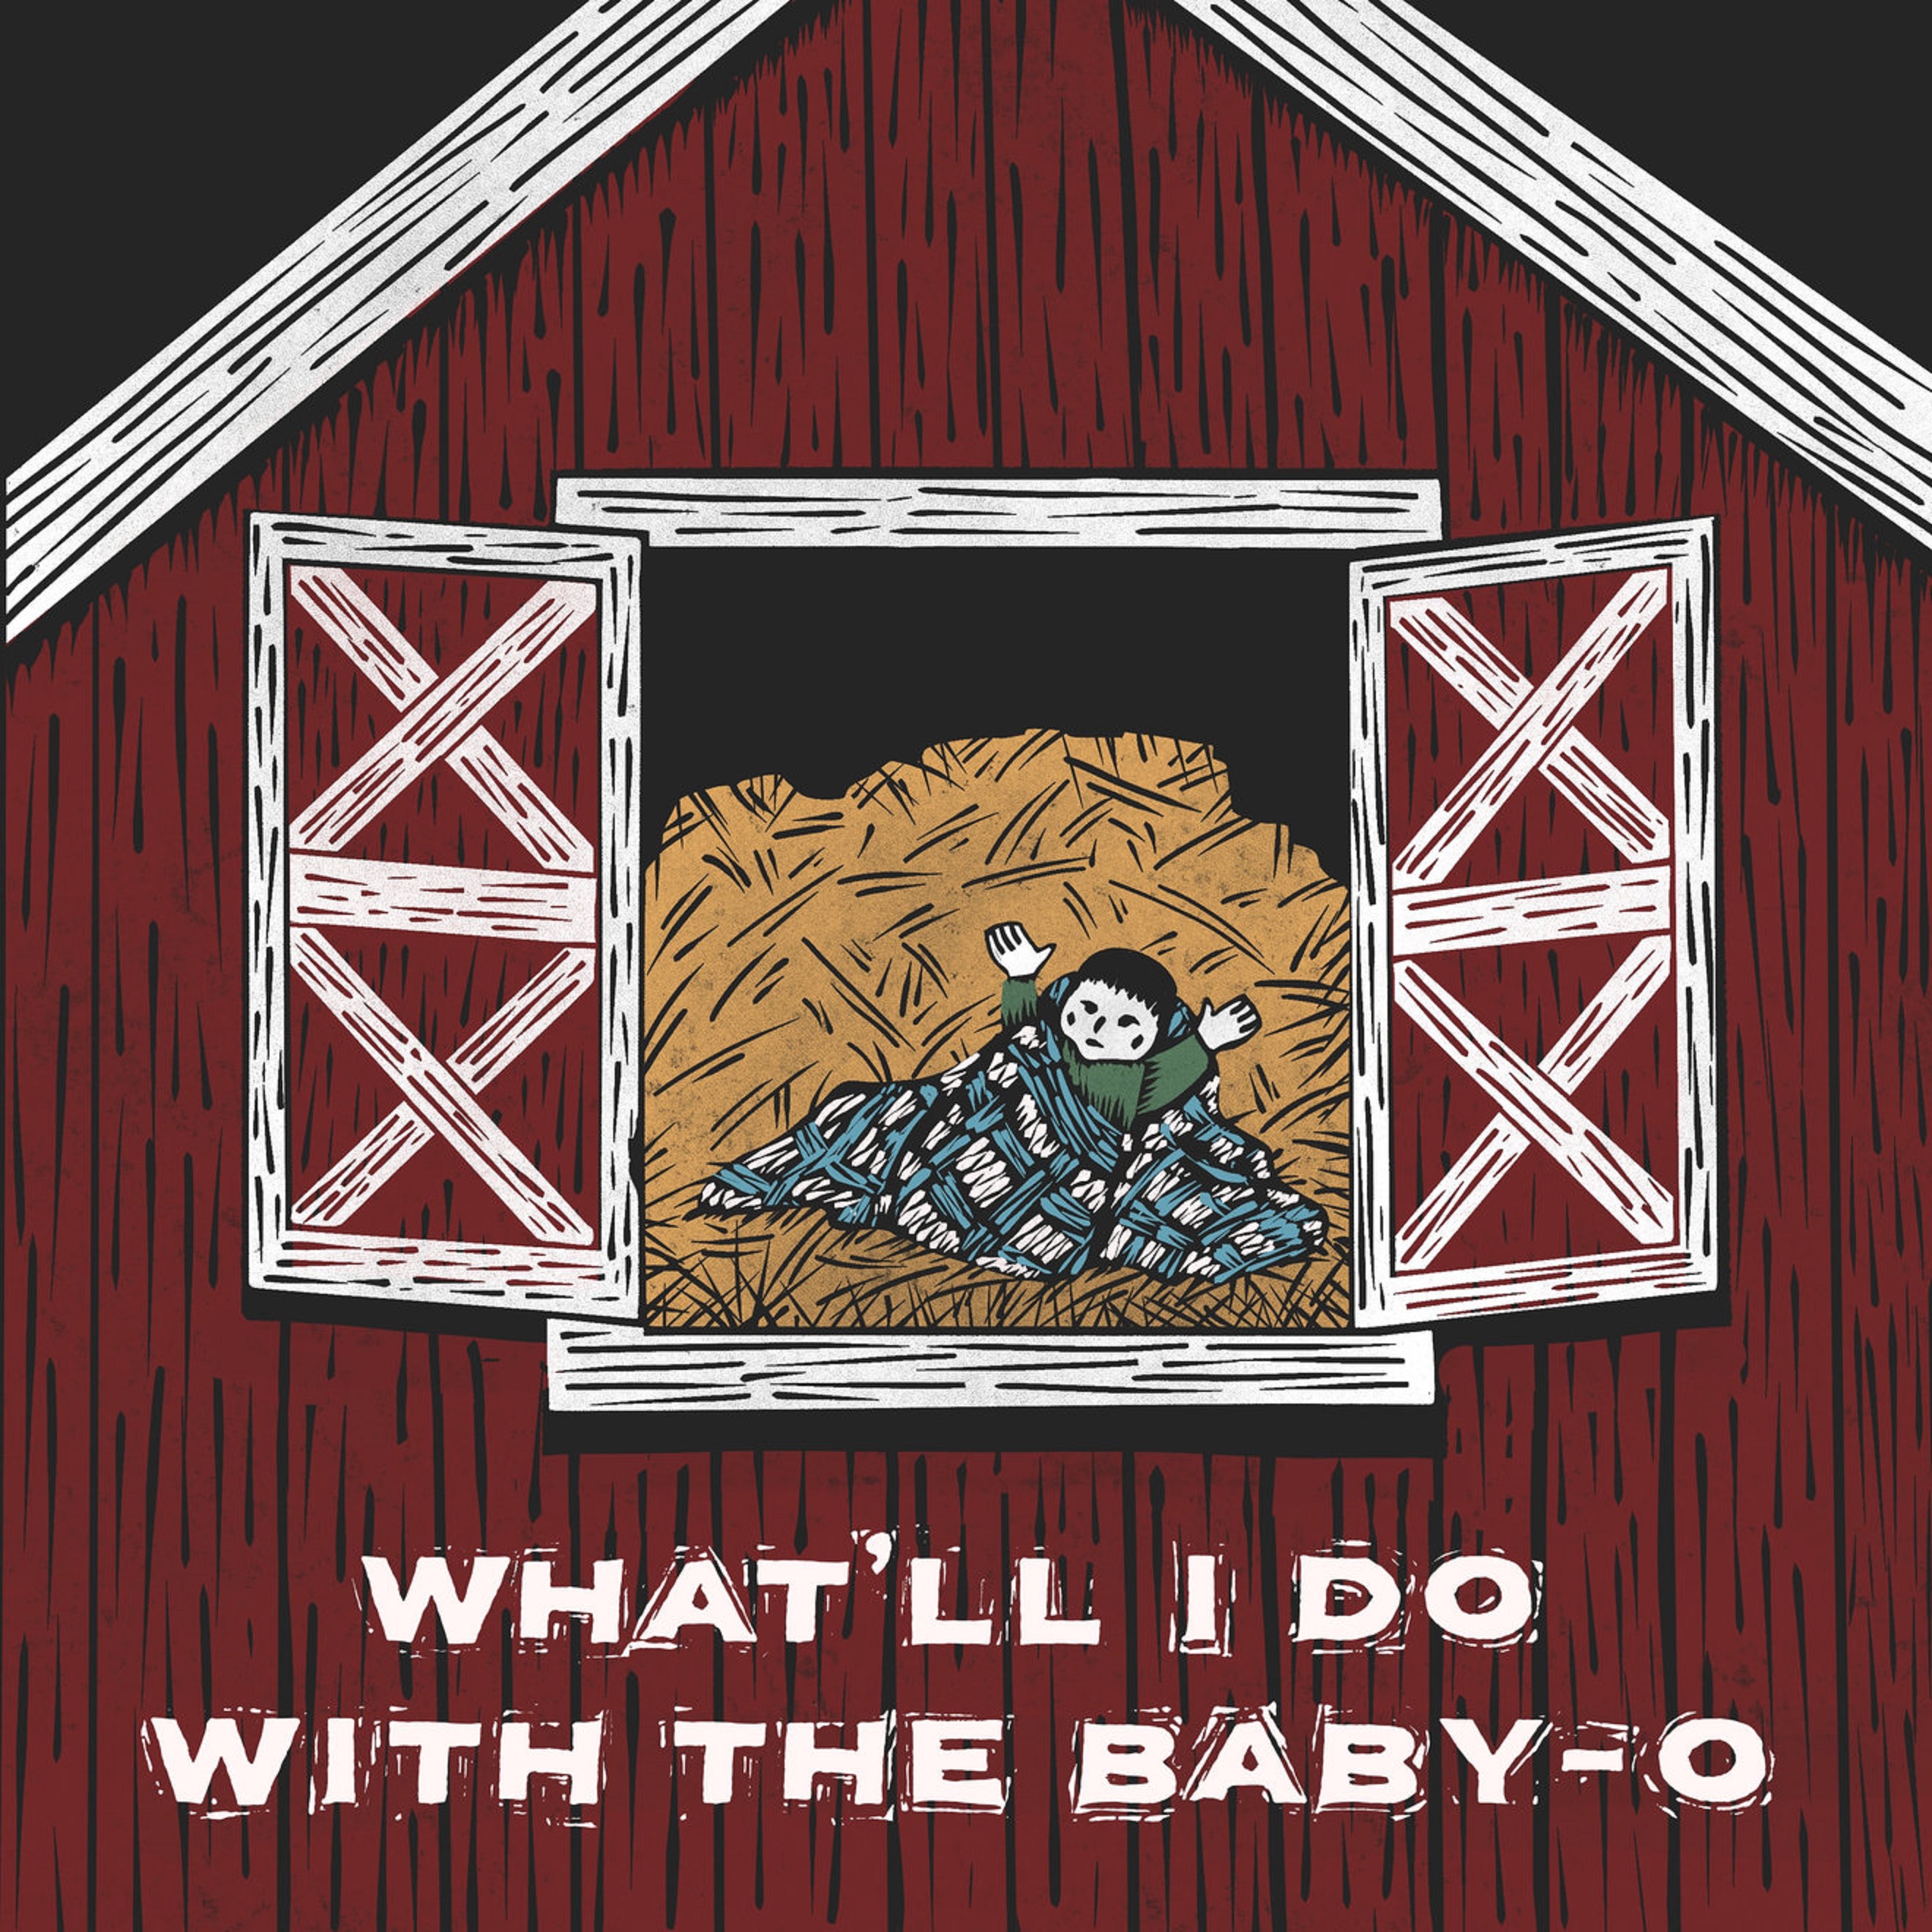 Jesse Smathers Cuts Loose With New Single, “What’ll I Do With the Baby-O”